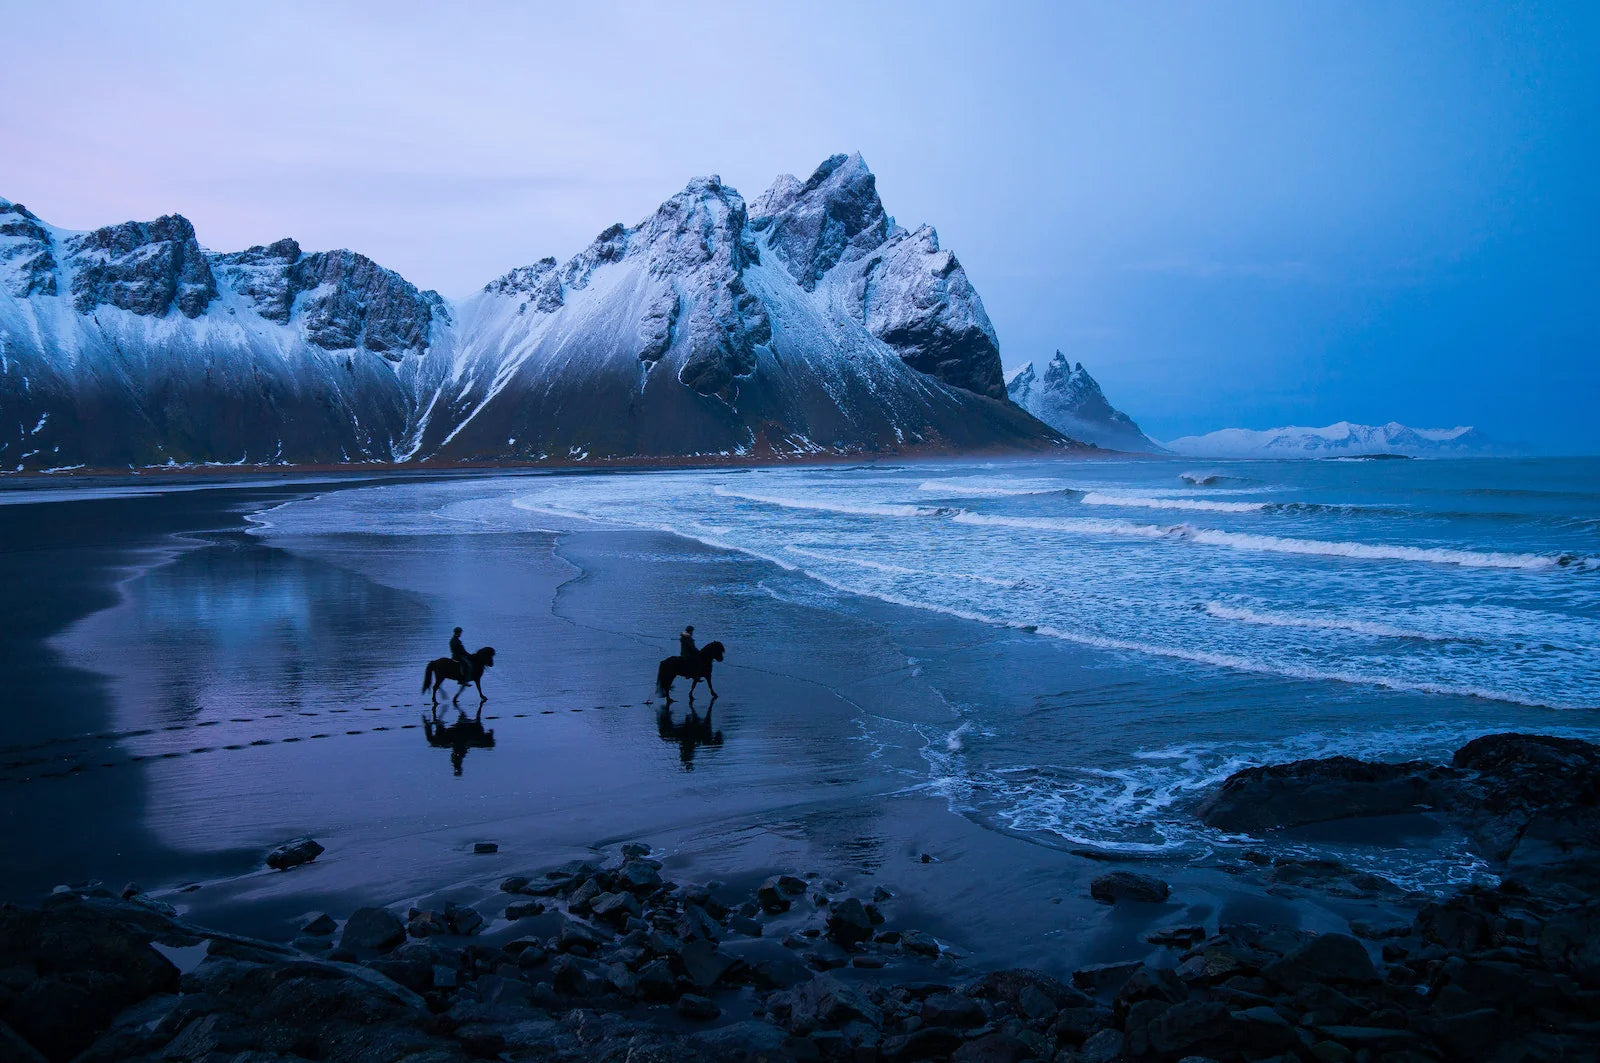 The Oceans by Chris Burkard